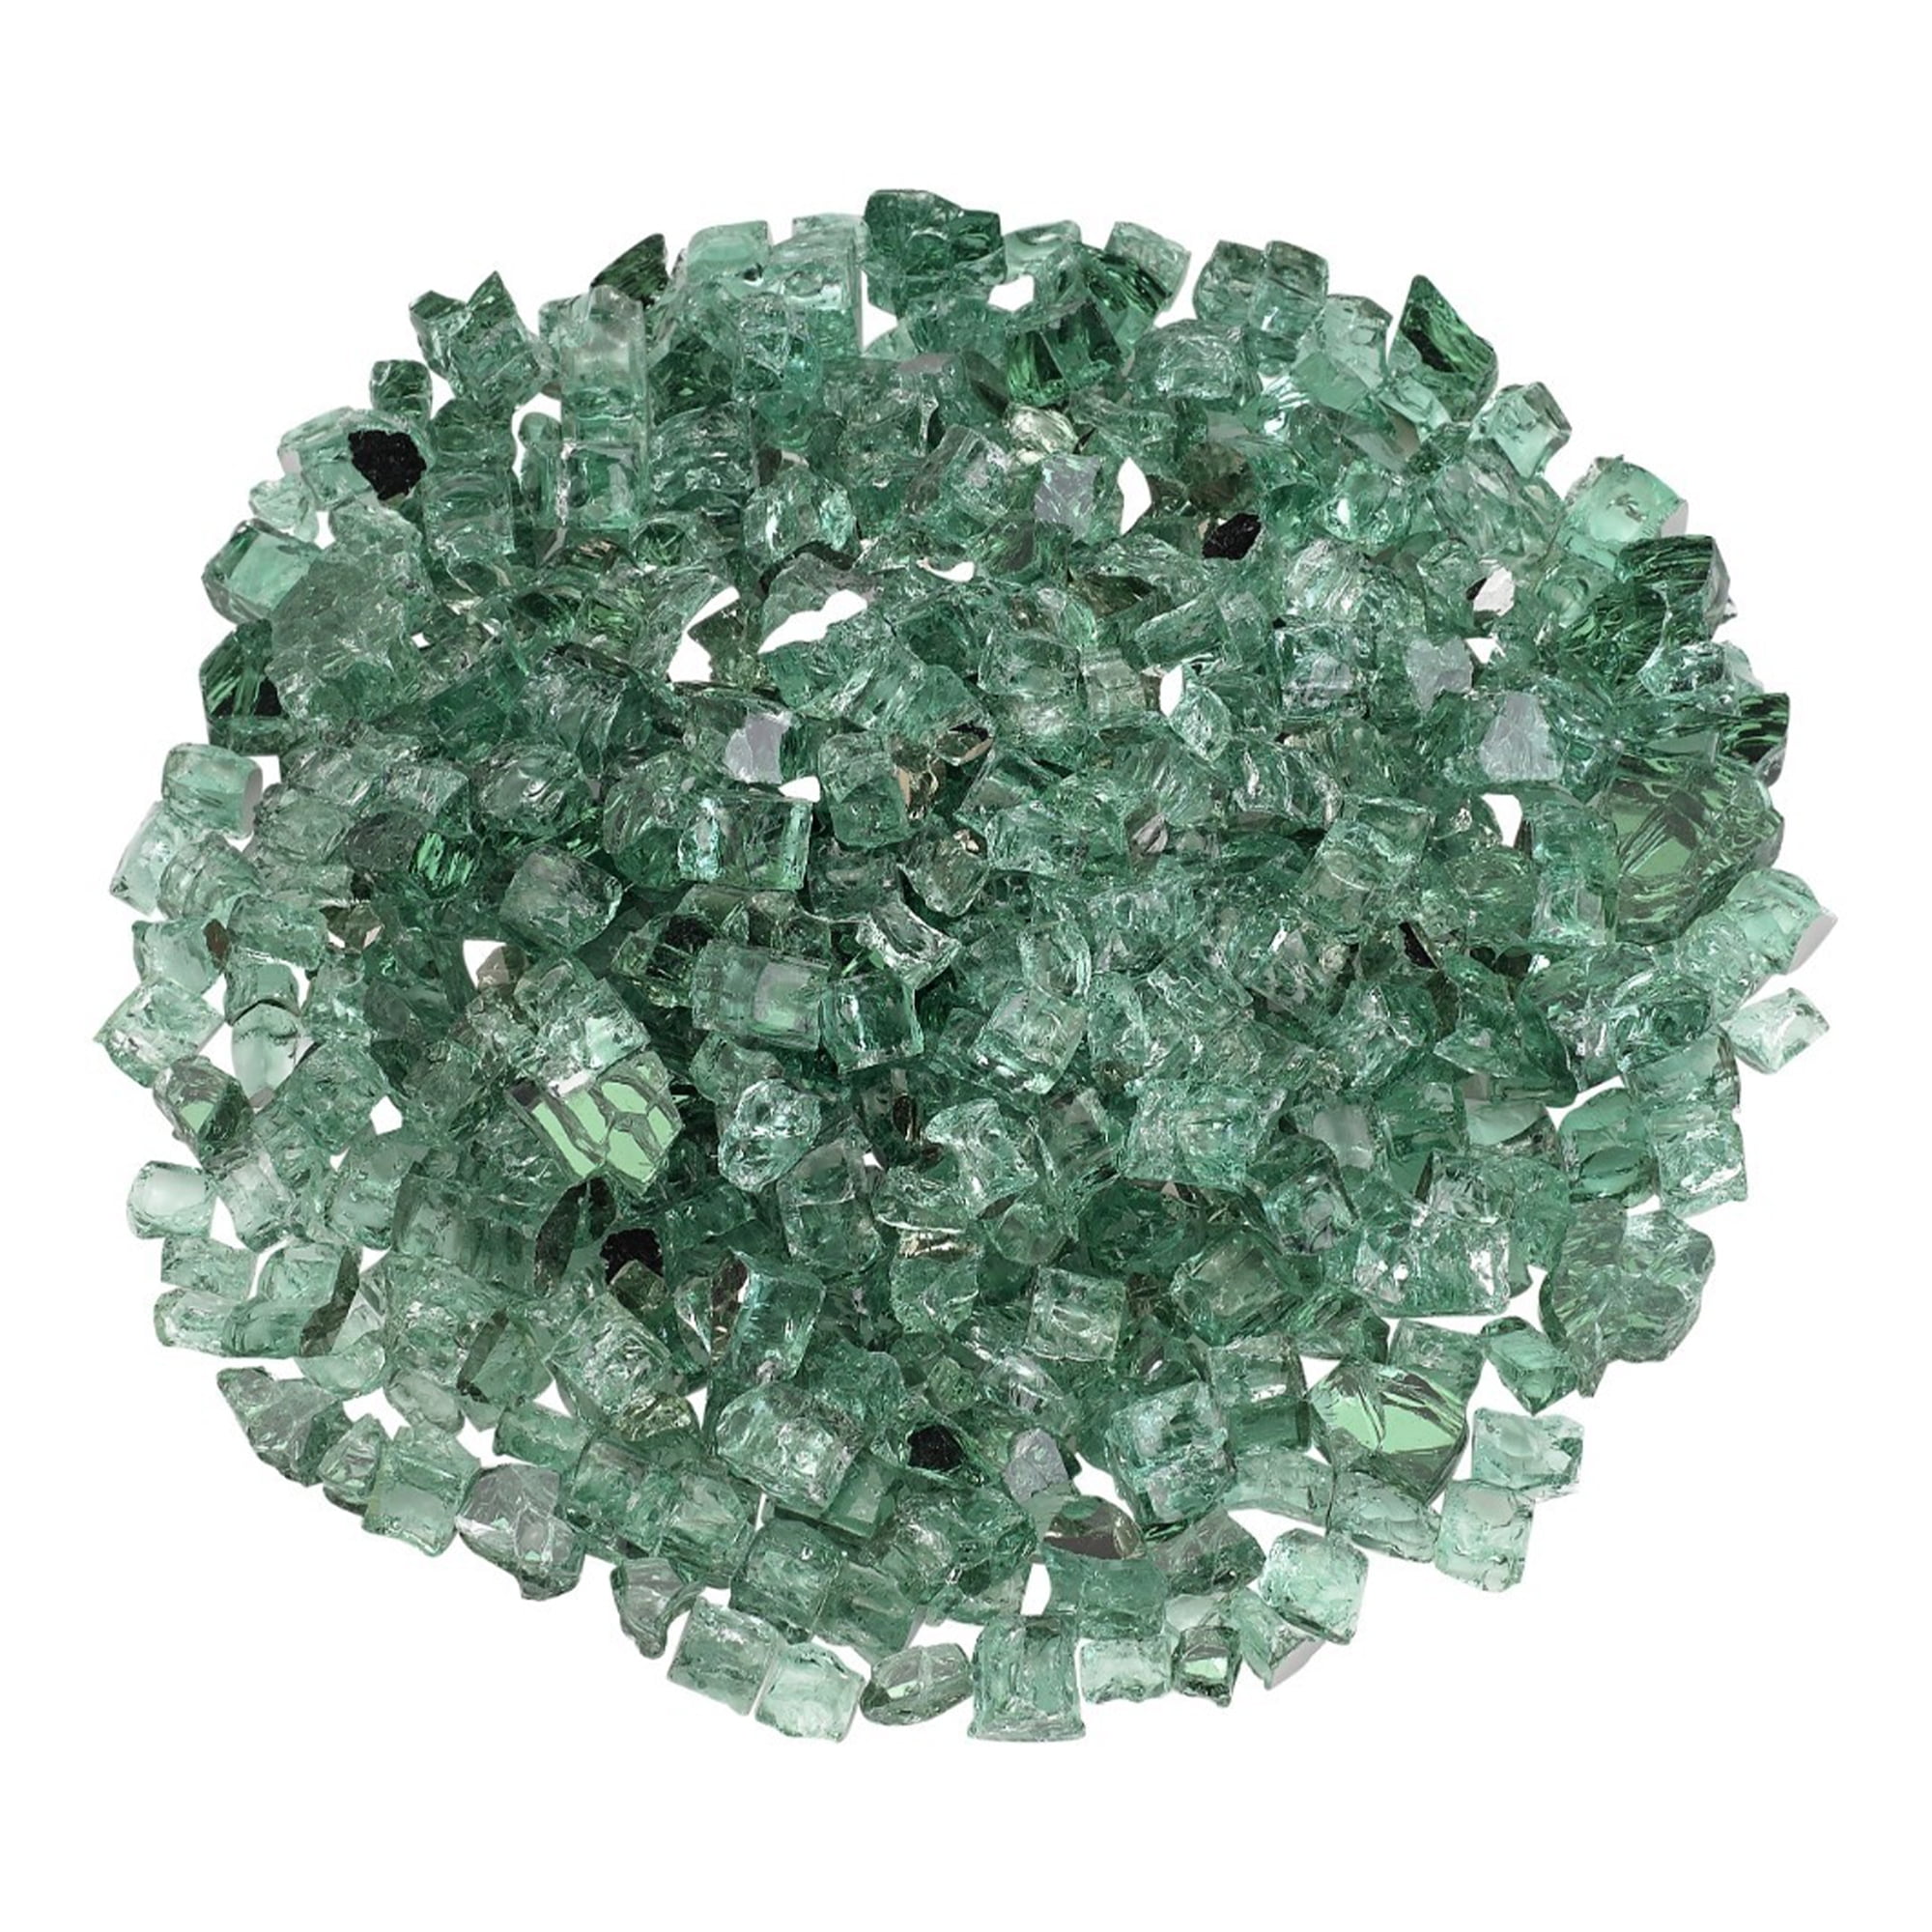 Picture of American Fireglass AFF-EVGRRF12-10 0.5 in. Evergreen Reflective Fire Glass - 10 lbs